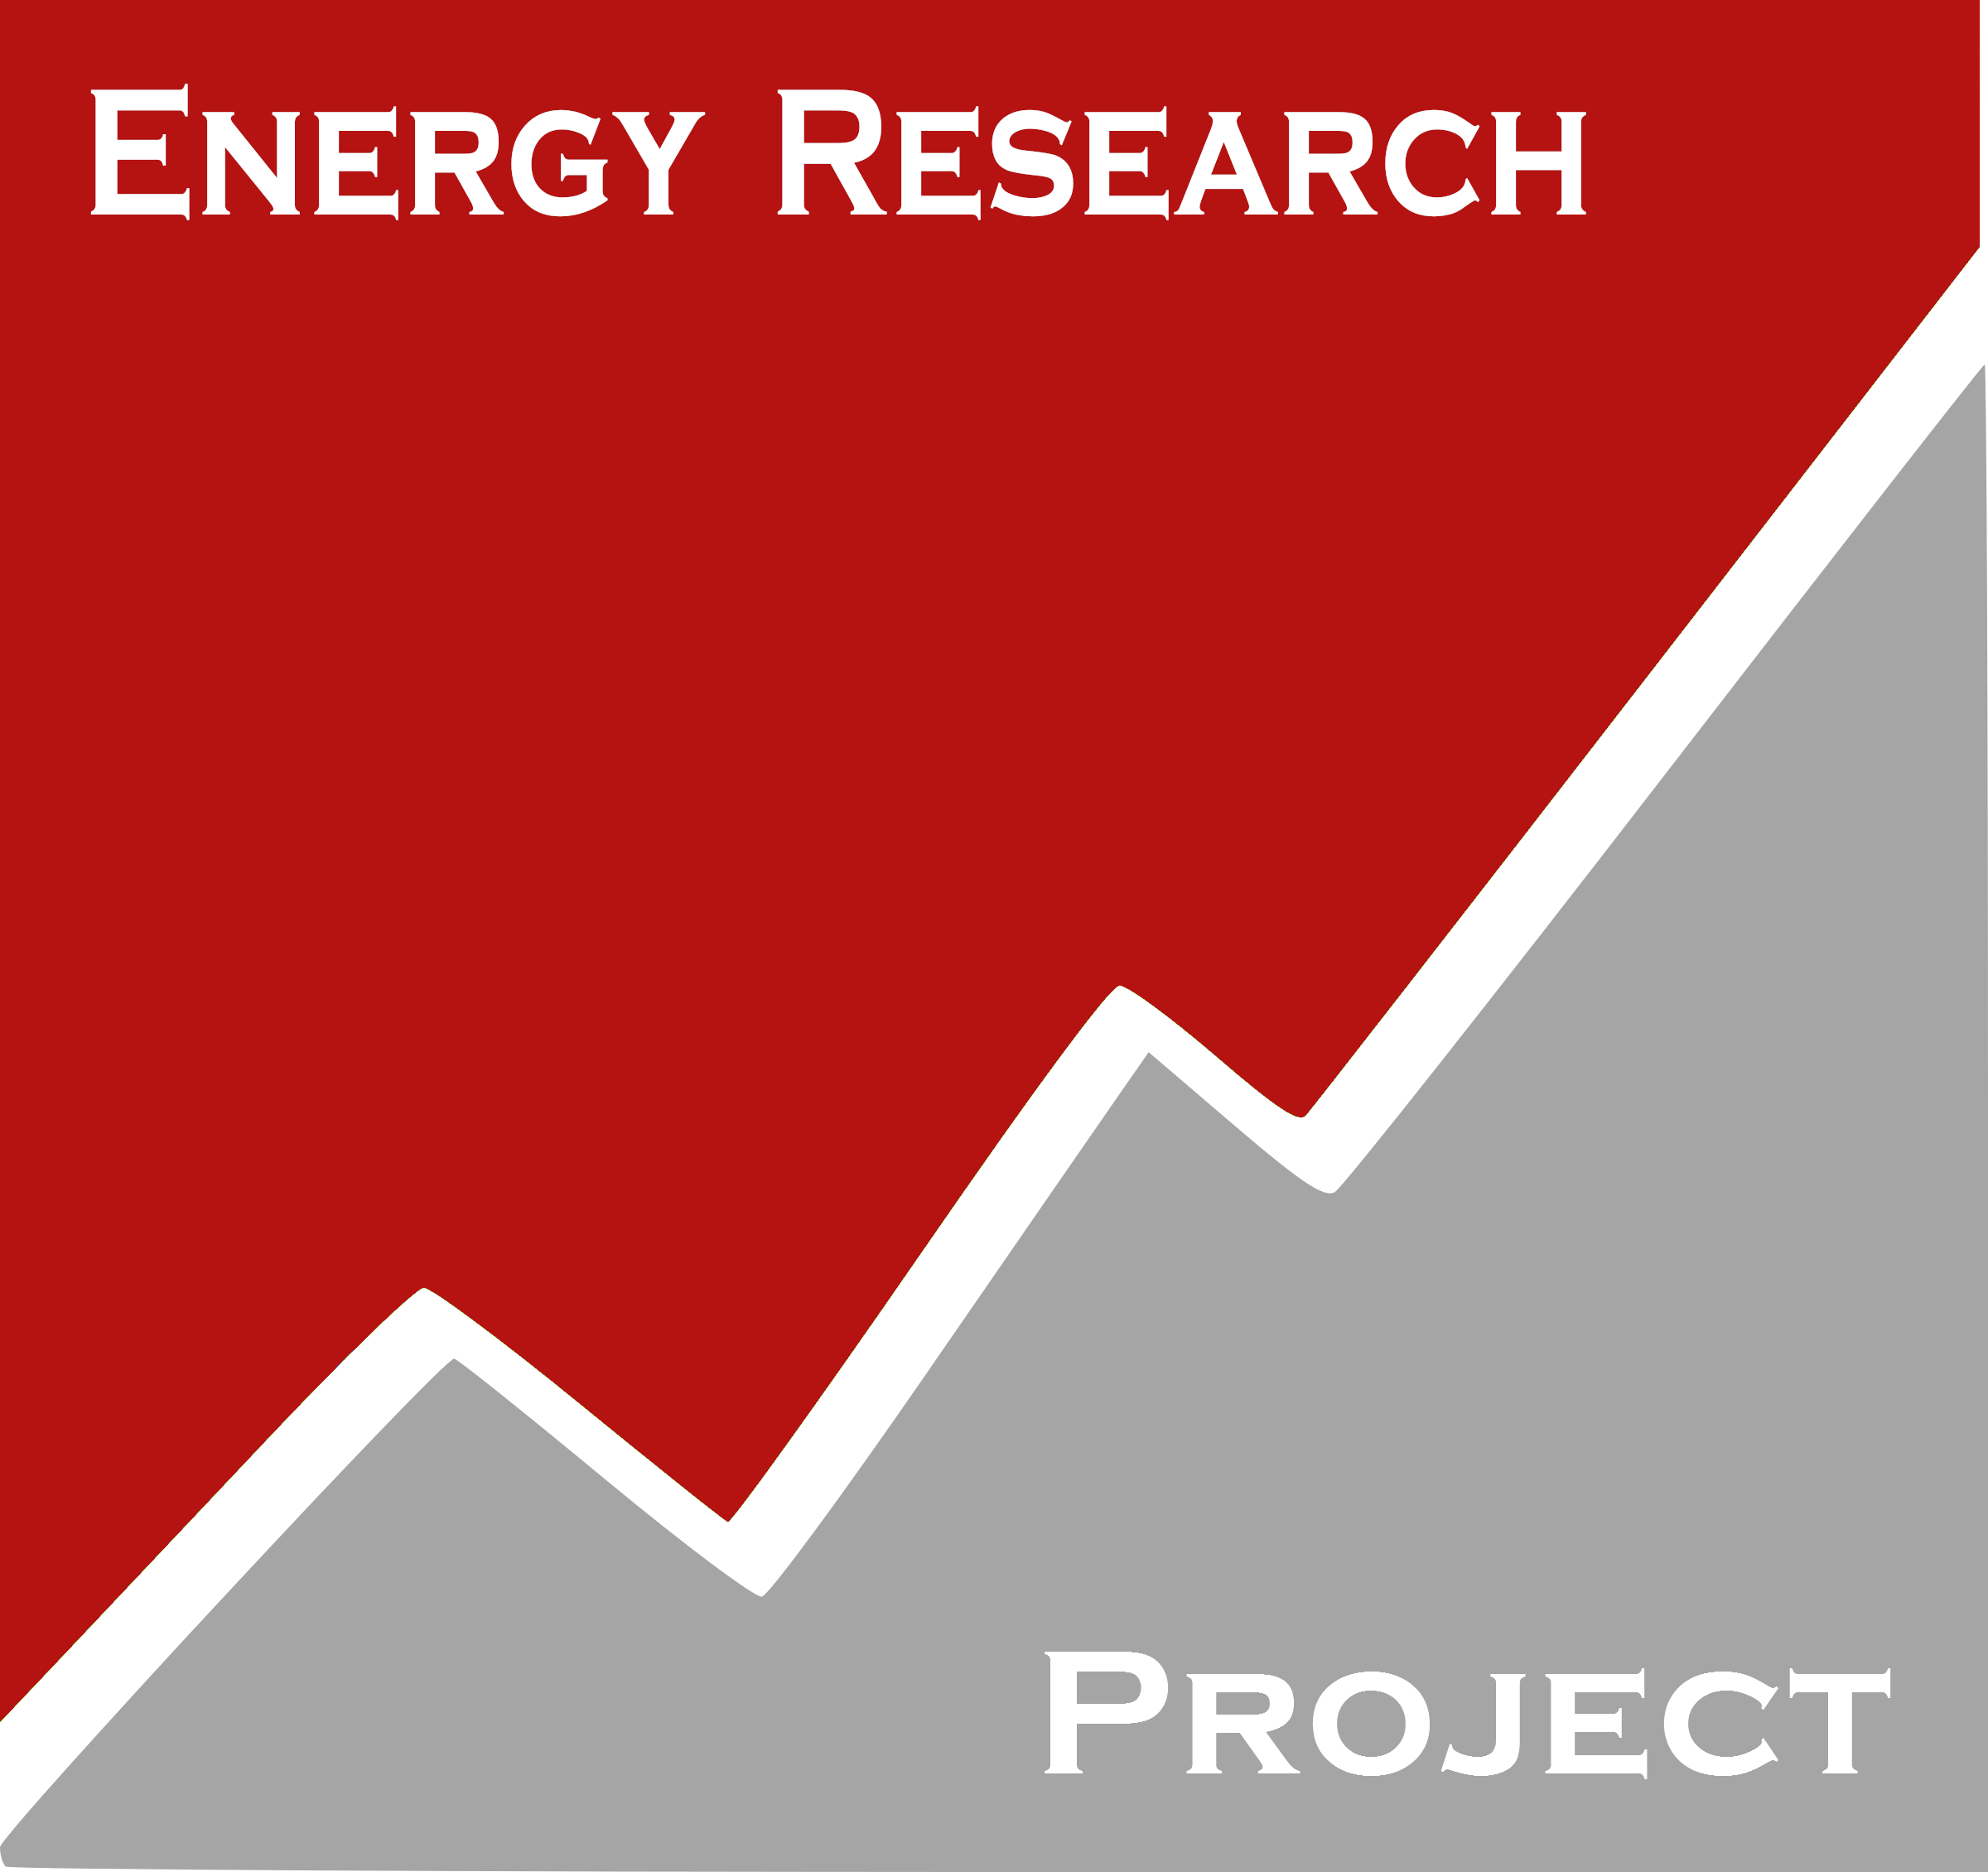 Energy Research Project logo